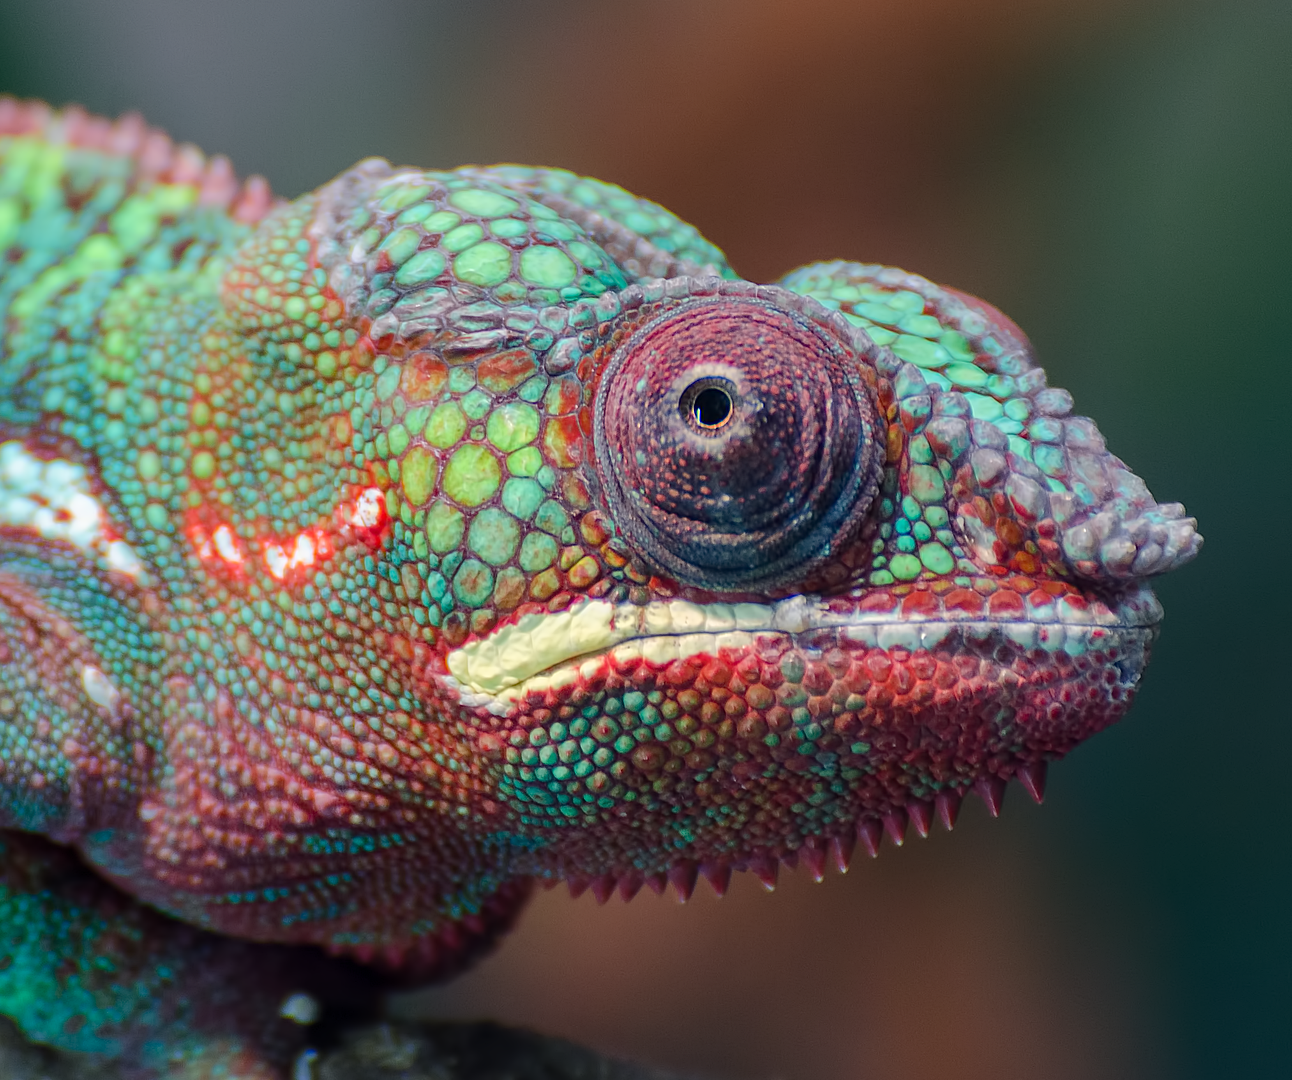 We’re calling for the UK Government to review and reform laws on exotic pet ownership.